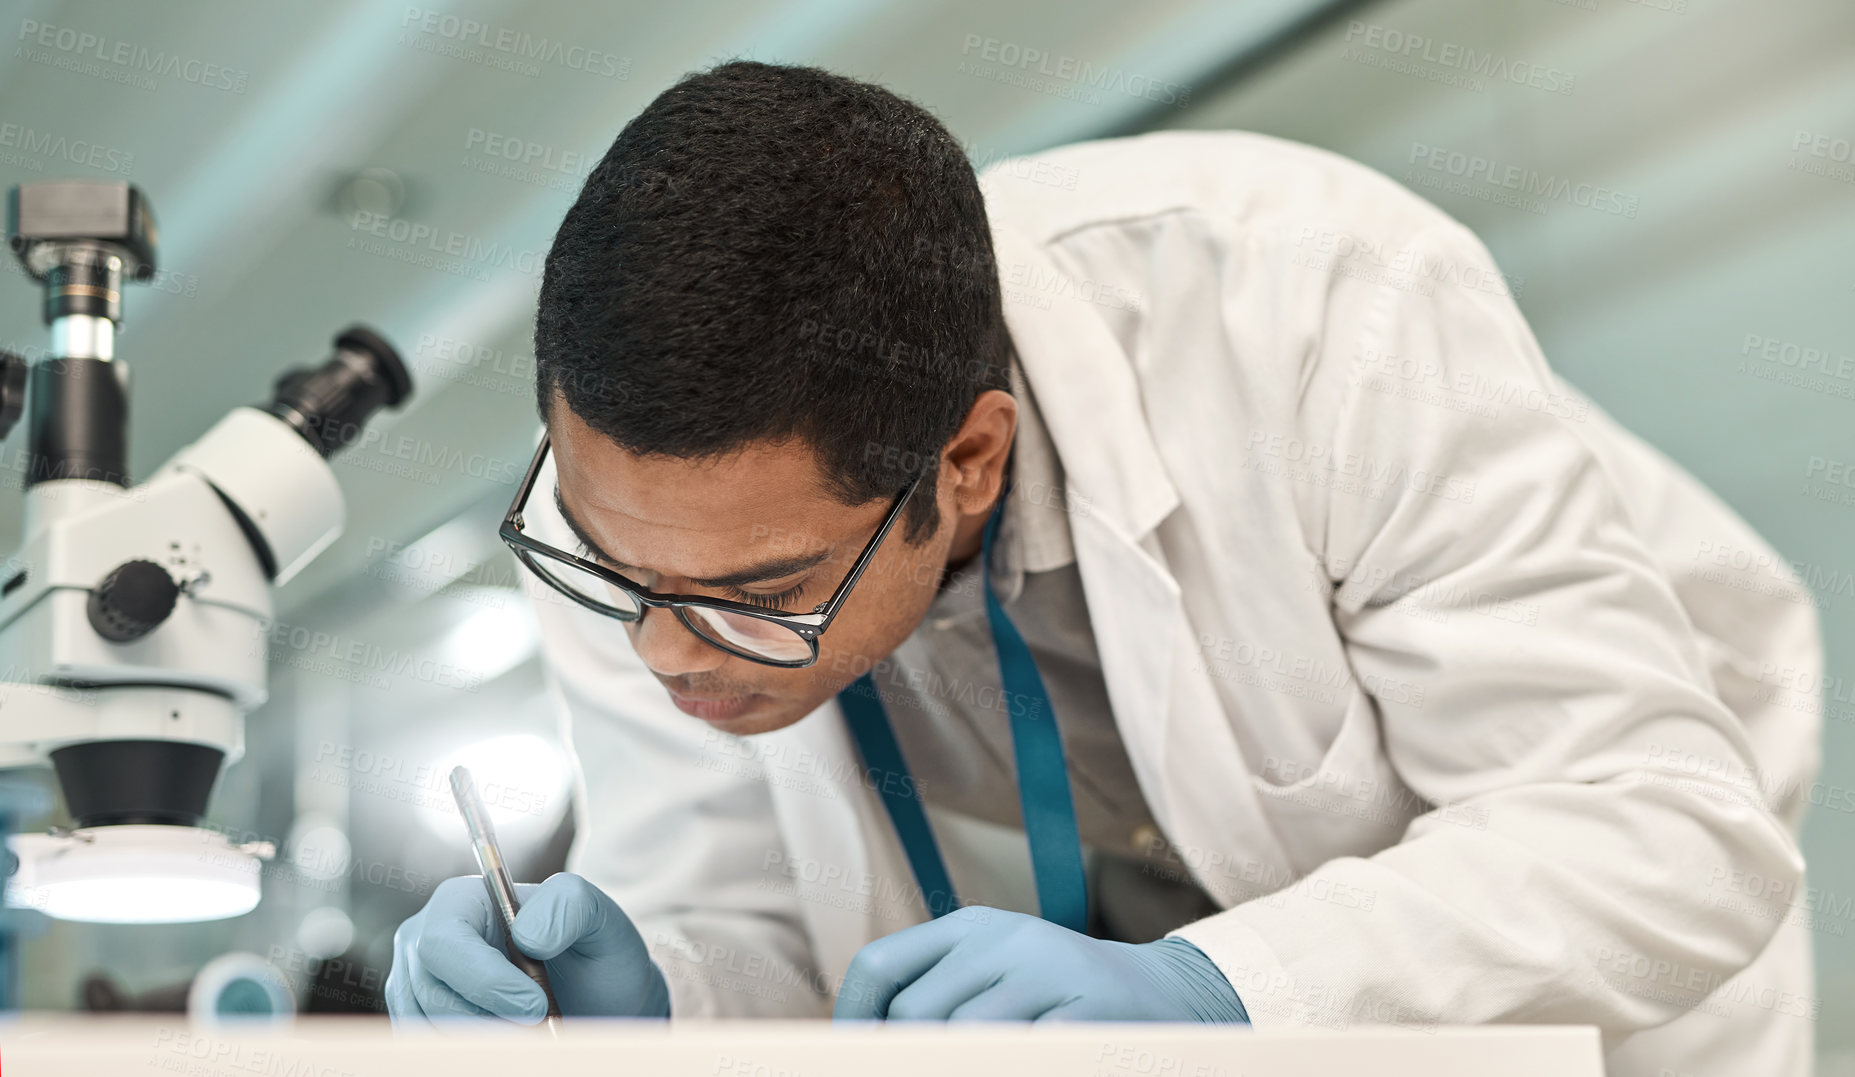 Buy stock photo Shot of a young scientist writing notes while working in a lab